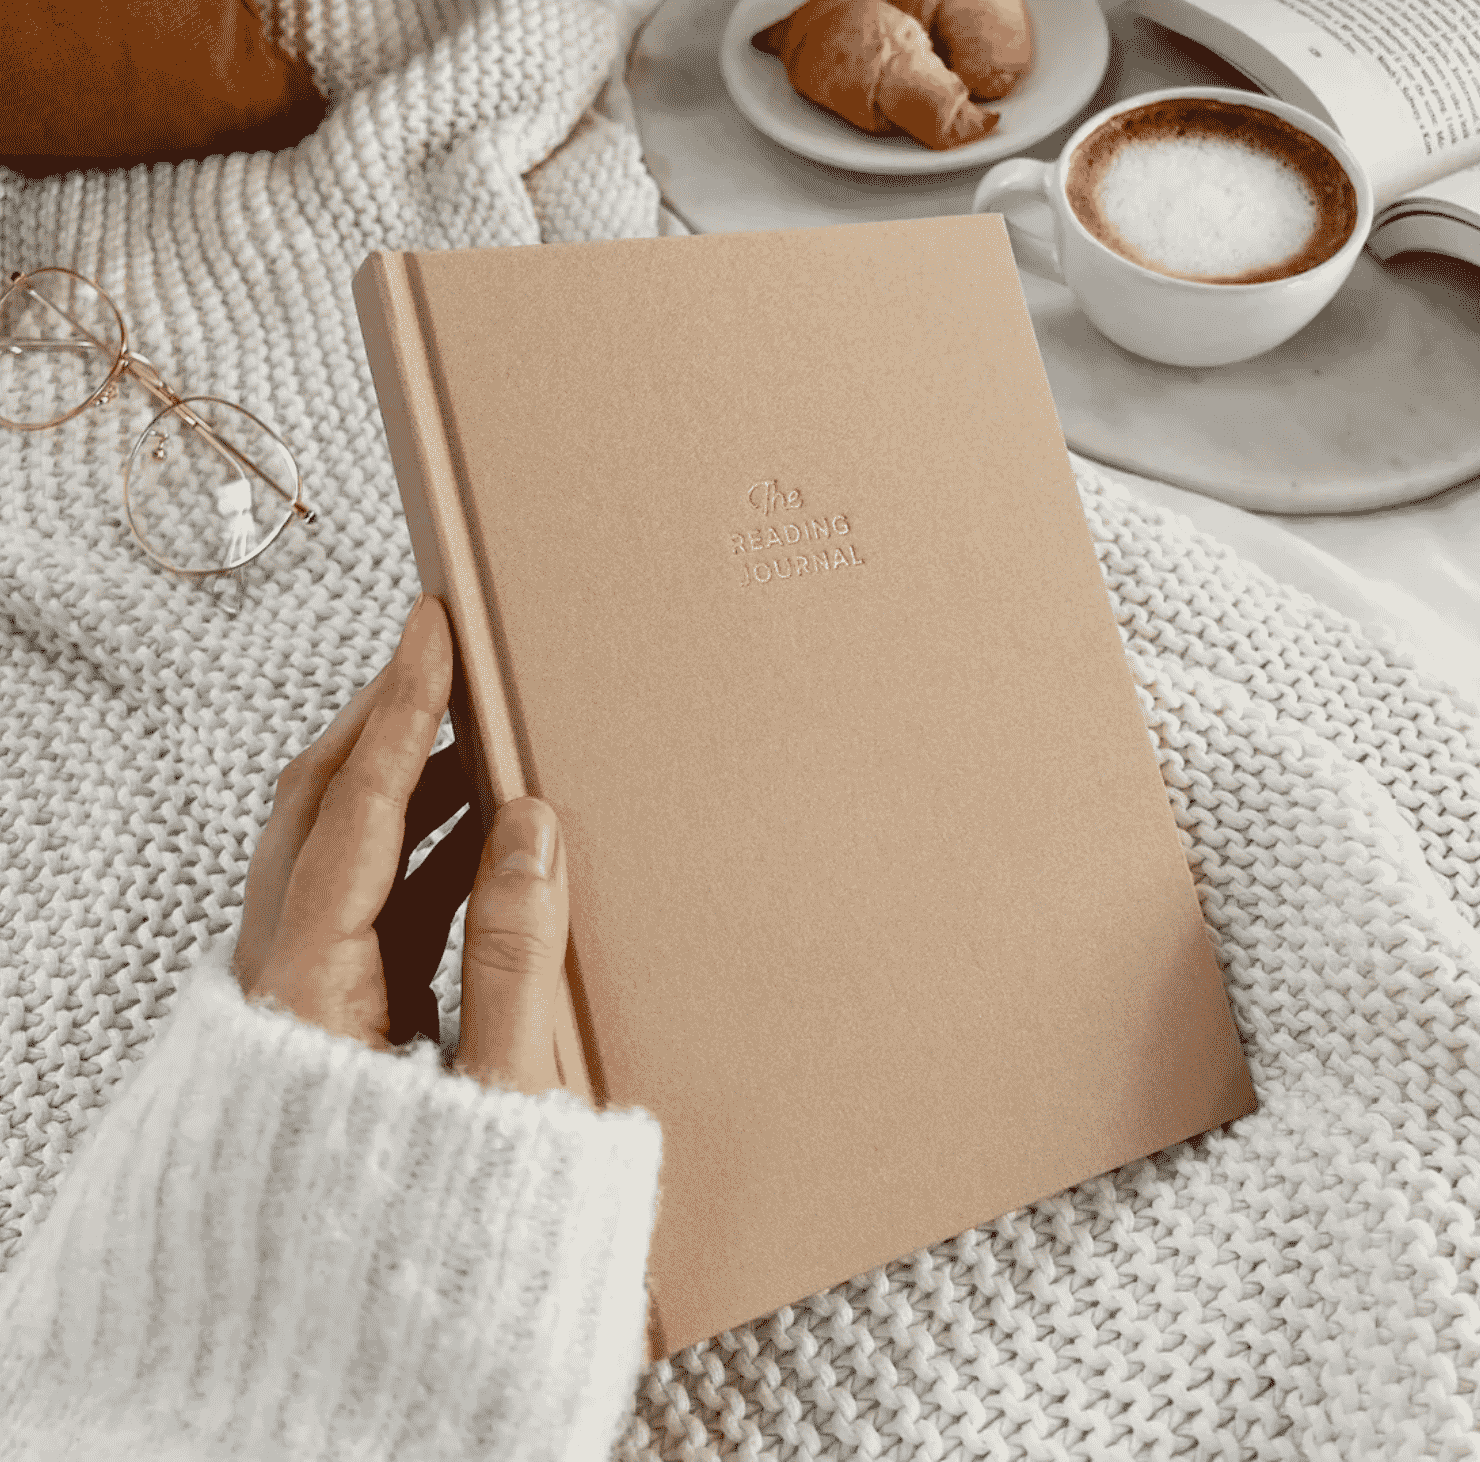 A womans hand holds a guided reading journal on a cozy bed with a cup of coffee